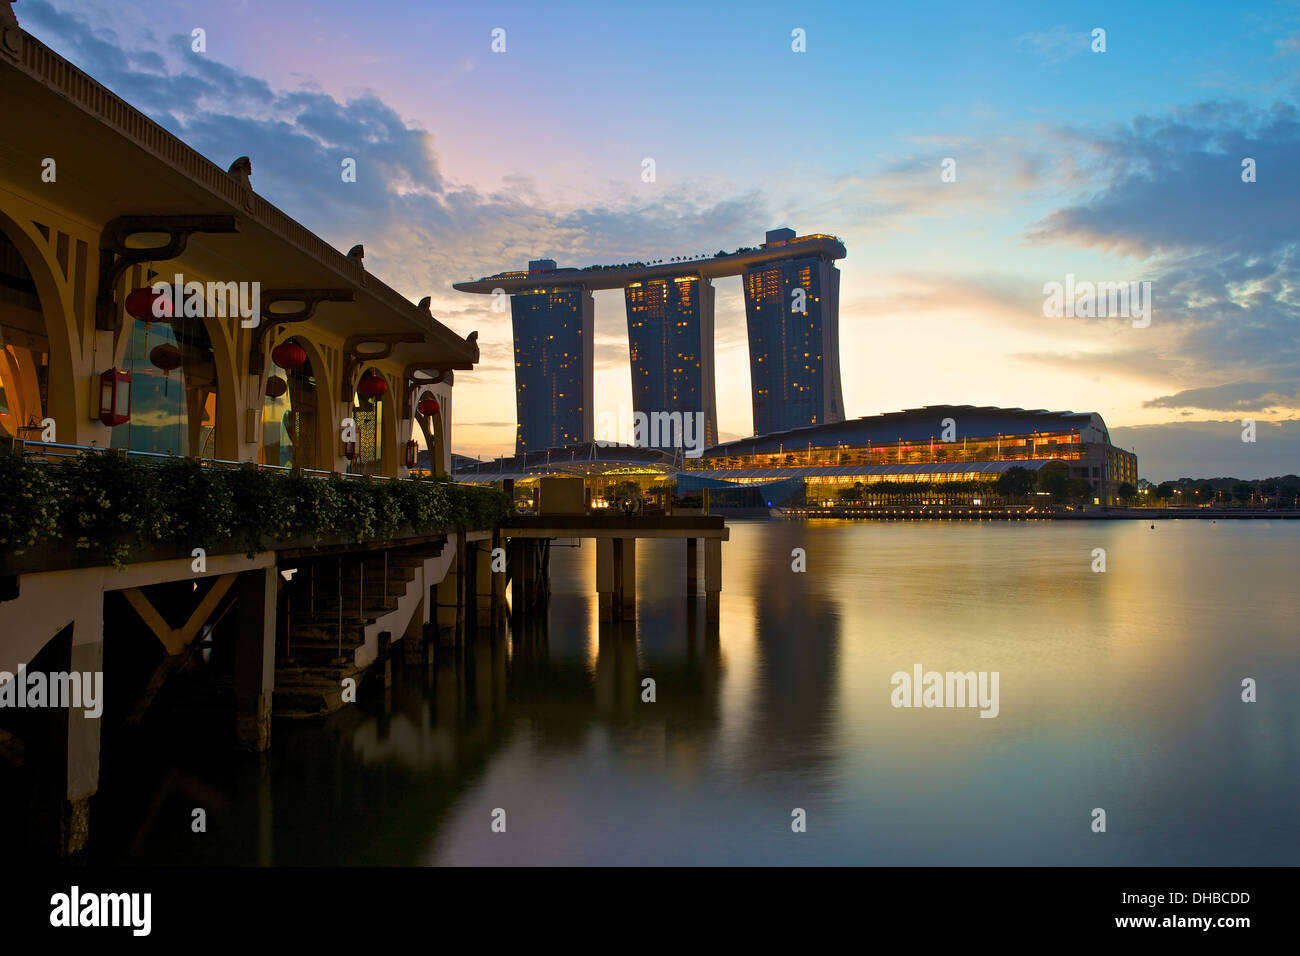 Dawn by The Fullerton Bay Hotel, Singapore. Stock Photo